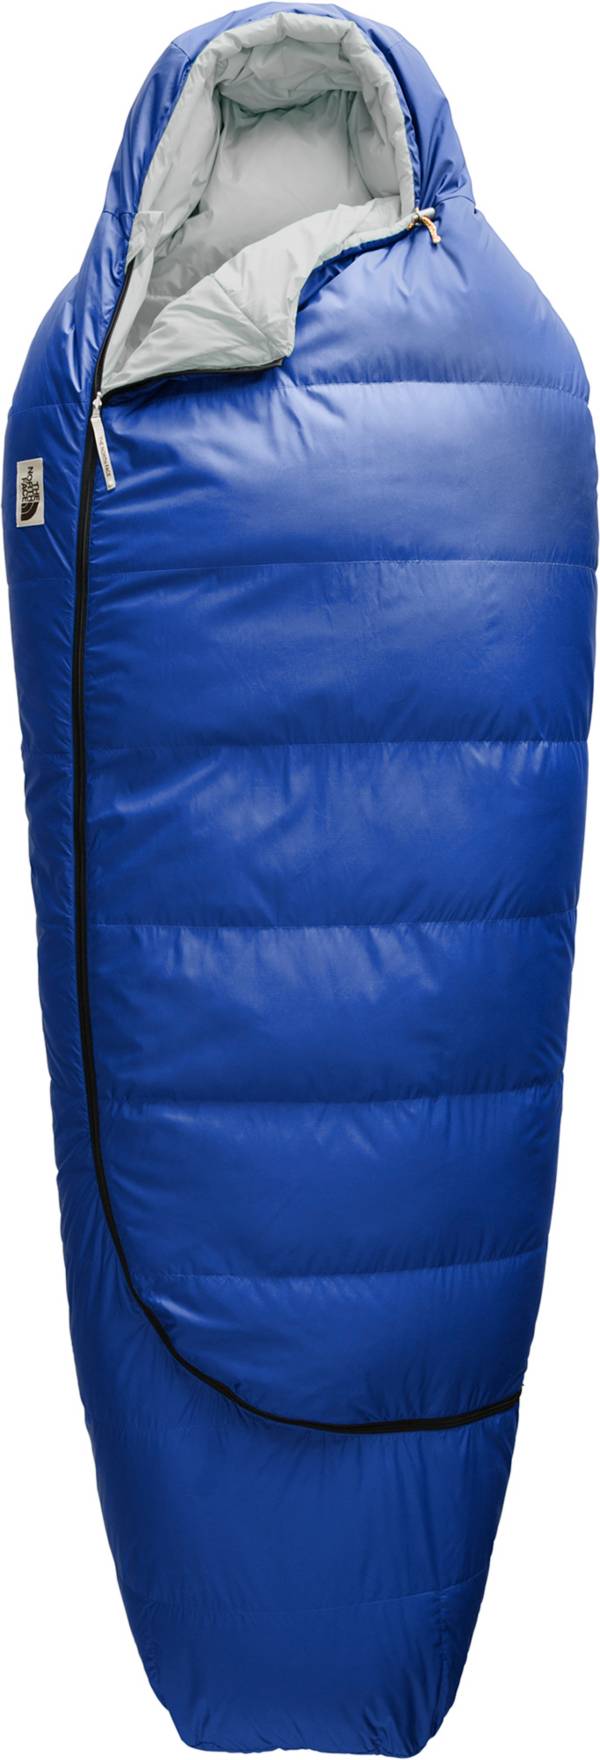 The North Face Eco Trail Down 20 Sleeping Bag product image